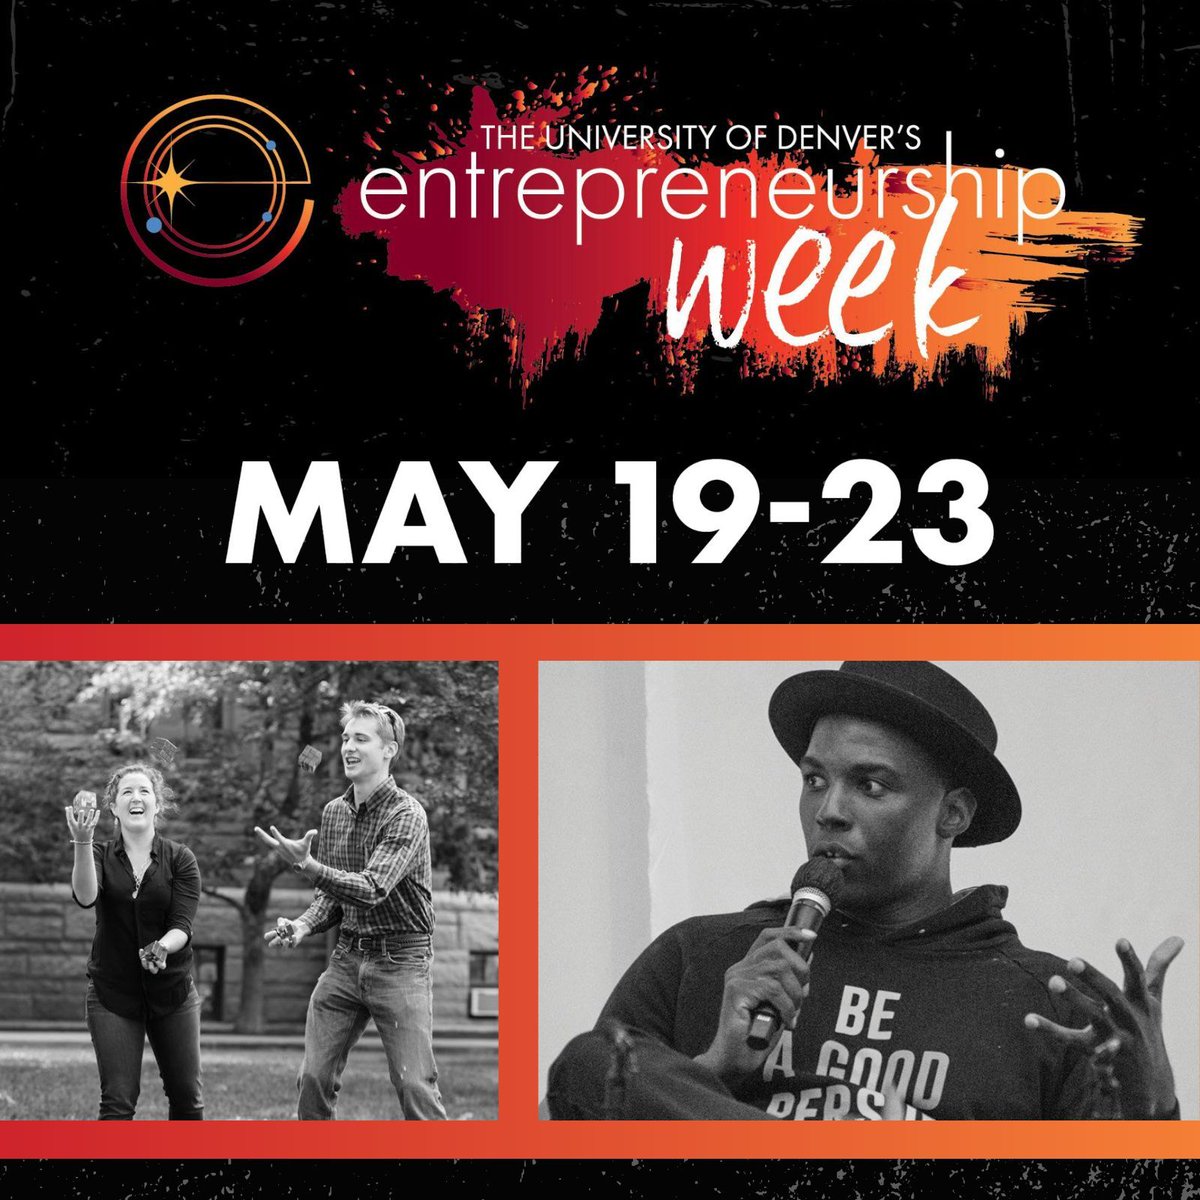 Entrepreneurship Week is rapidly approaching at the University of Denver, starting on May 19 and running through May 23! 💡📆 Be sure to check out the full event schedule here: buff.ly/3wiVgyz